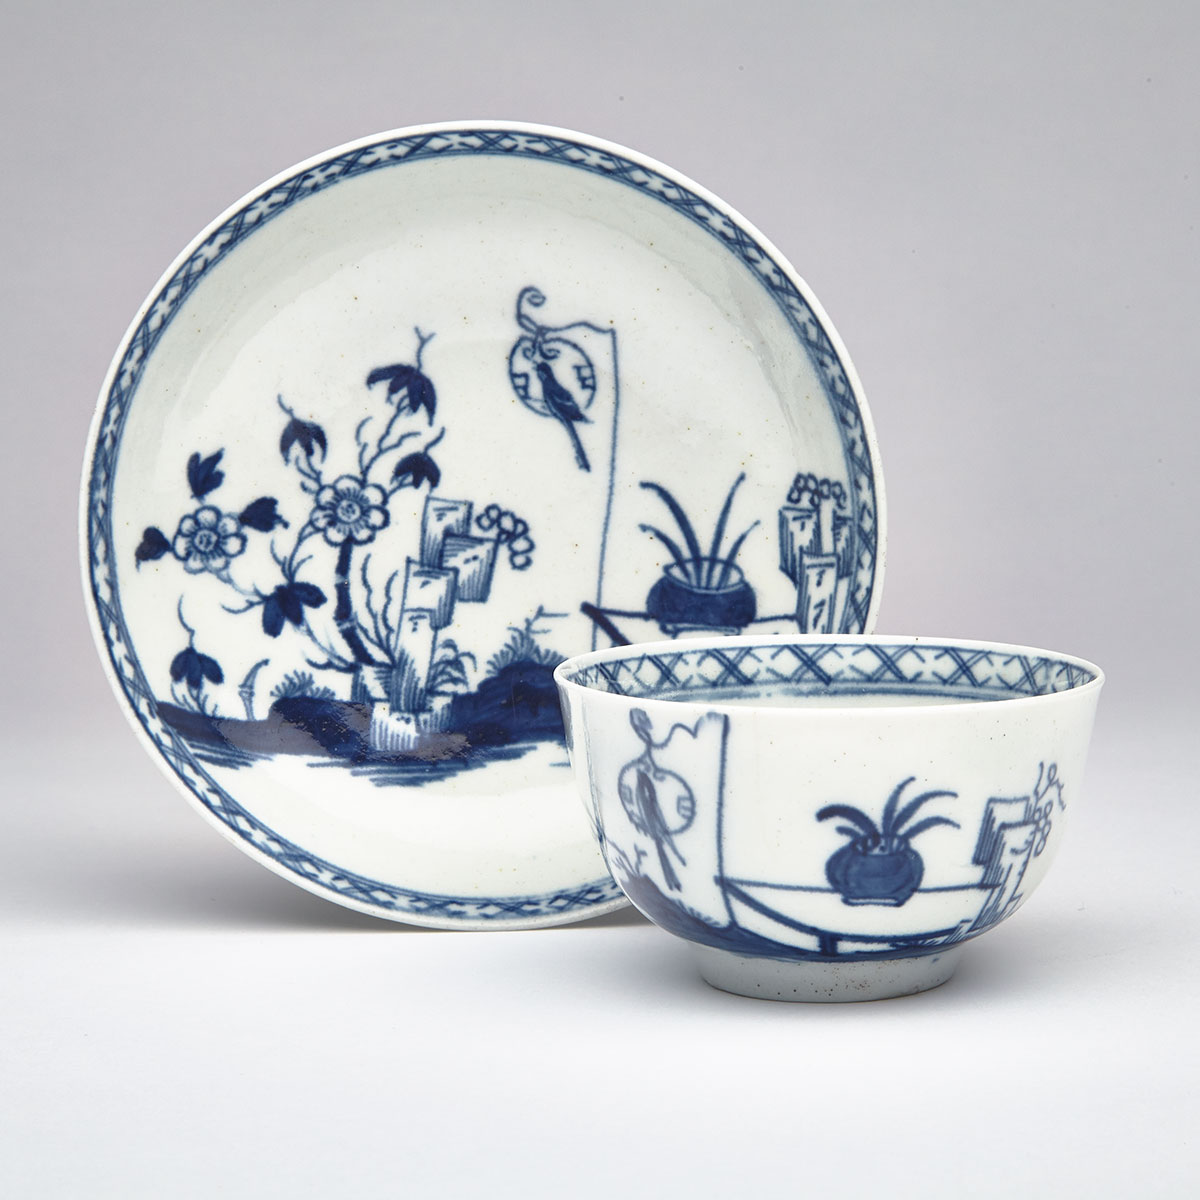 Worcester ‘Bird in a Ring’ Tea Bowl and Saucer, c.1760-70